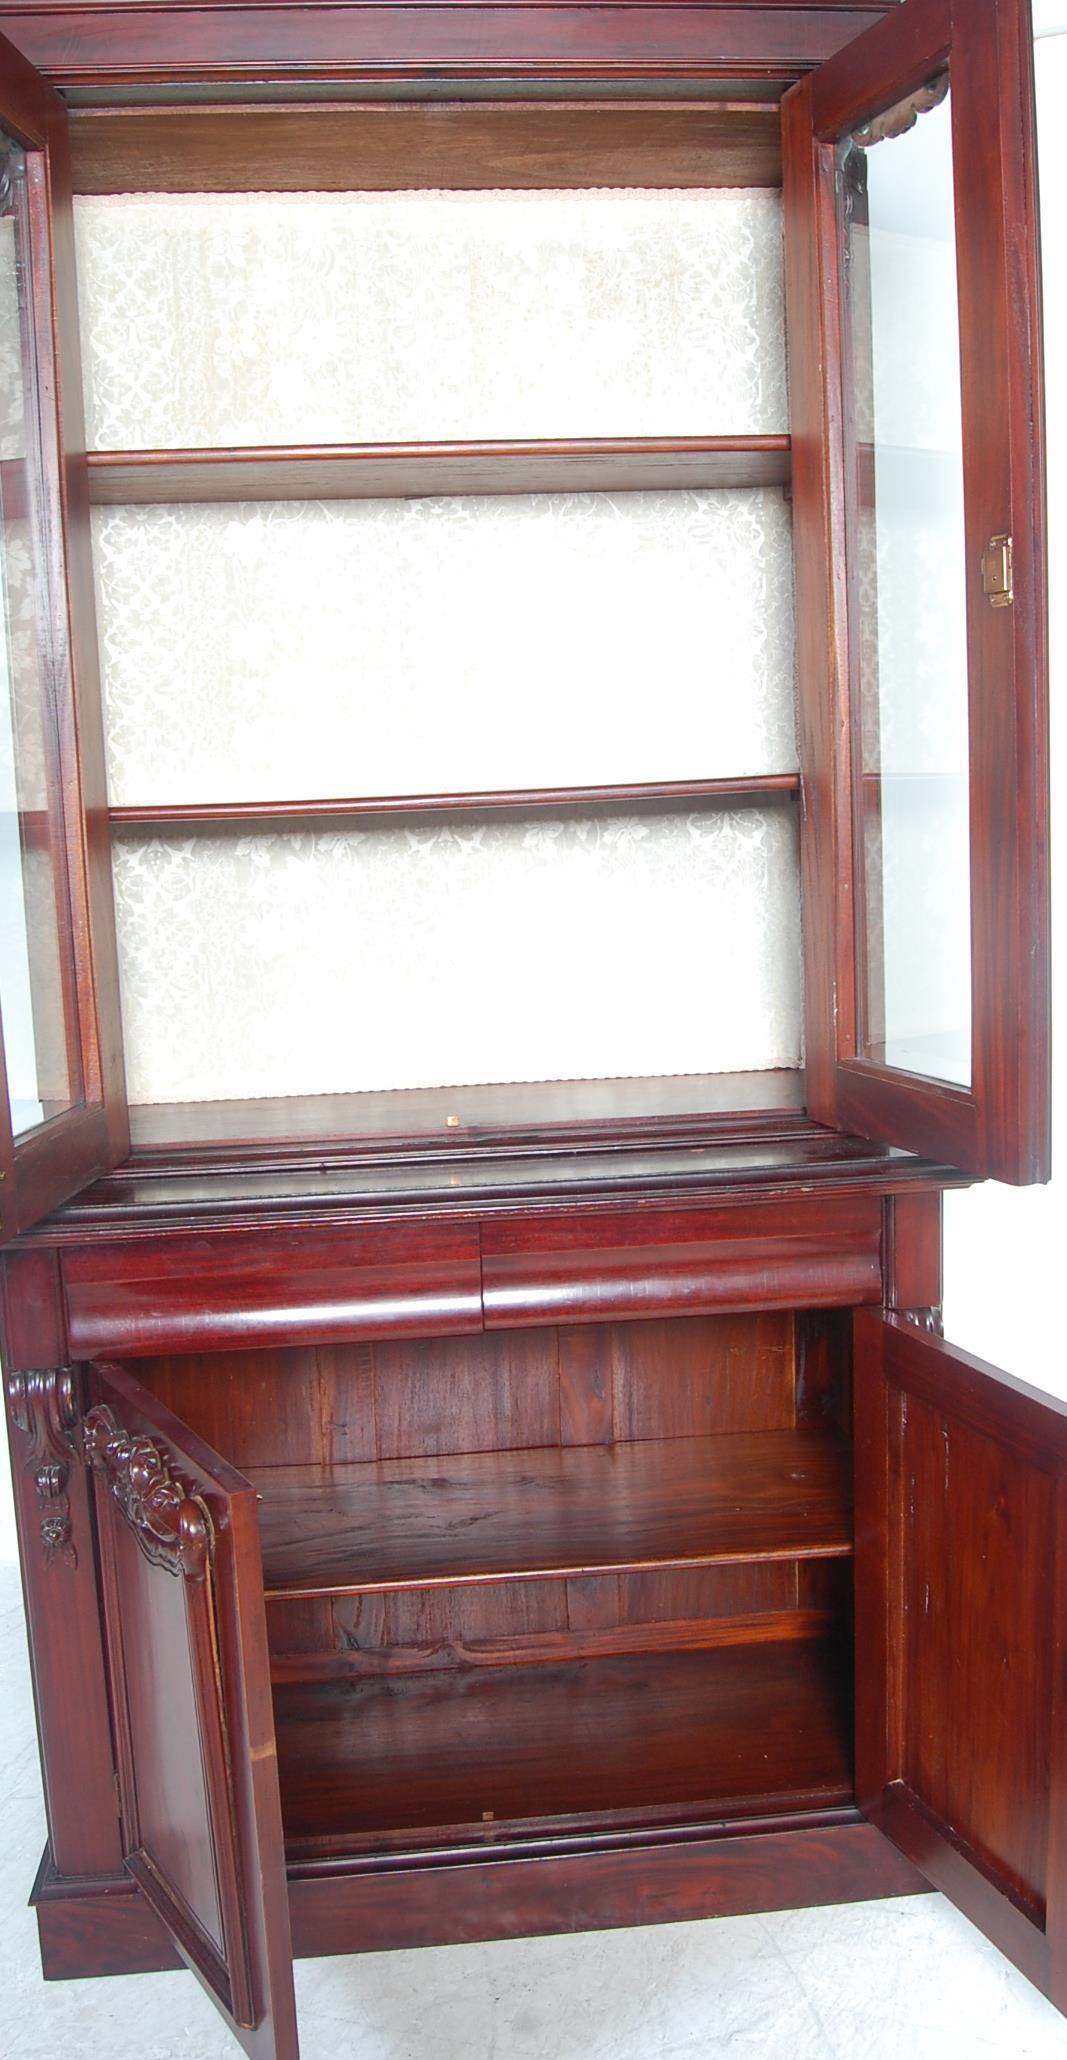 VICTORIAN STYLE MAHOGANY LIBRARY BOOKCASE - Image 2 of 3